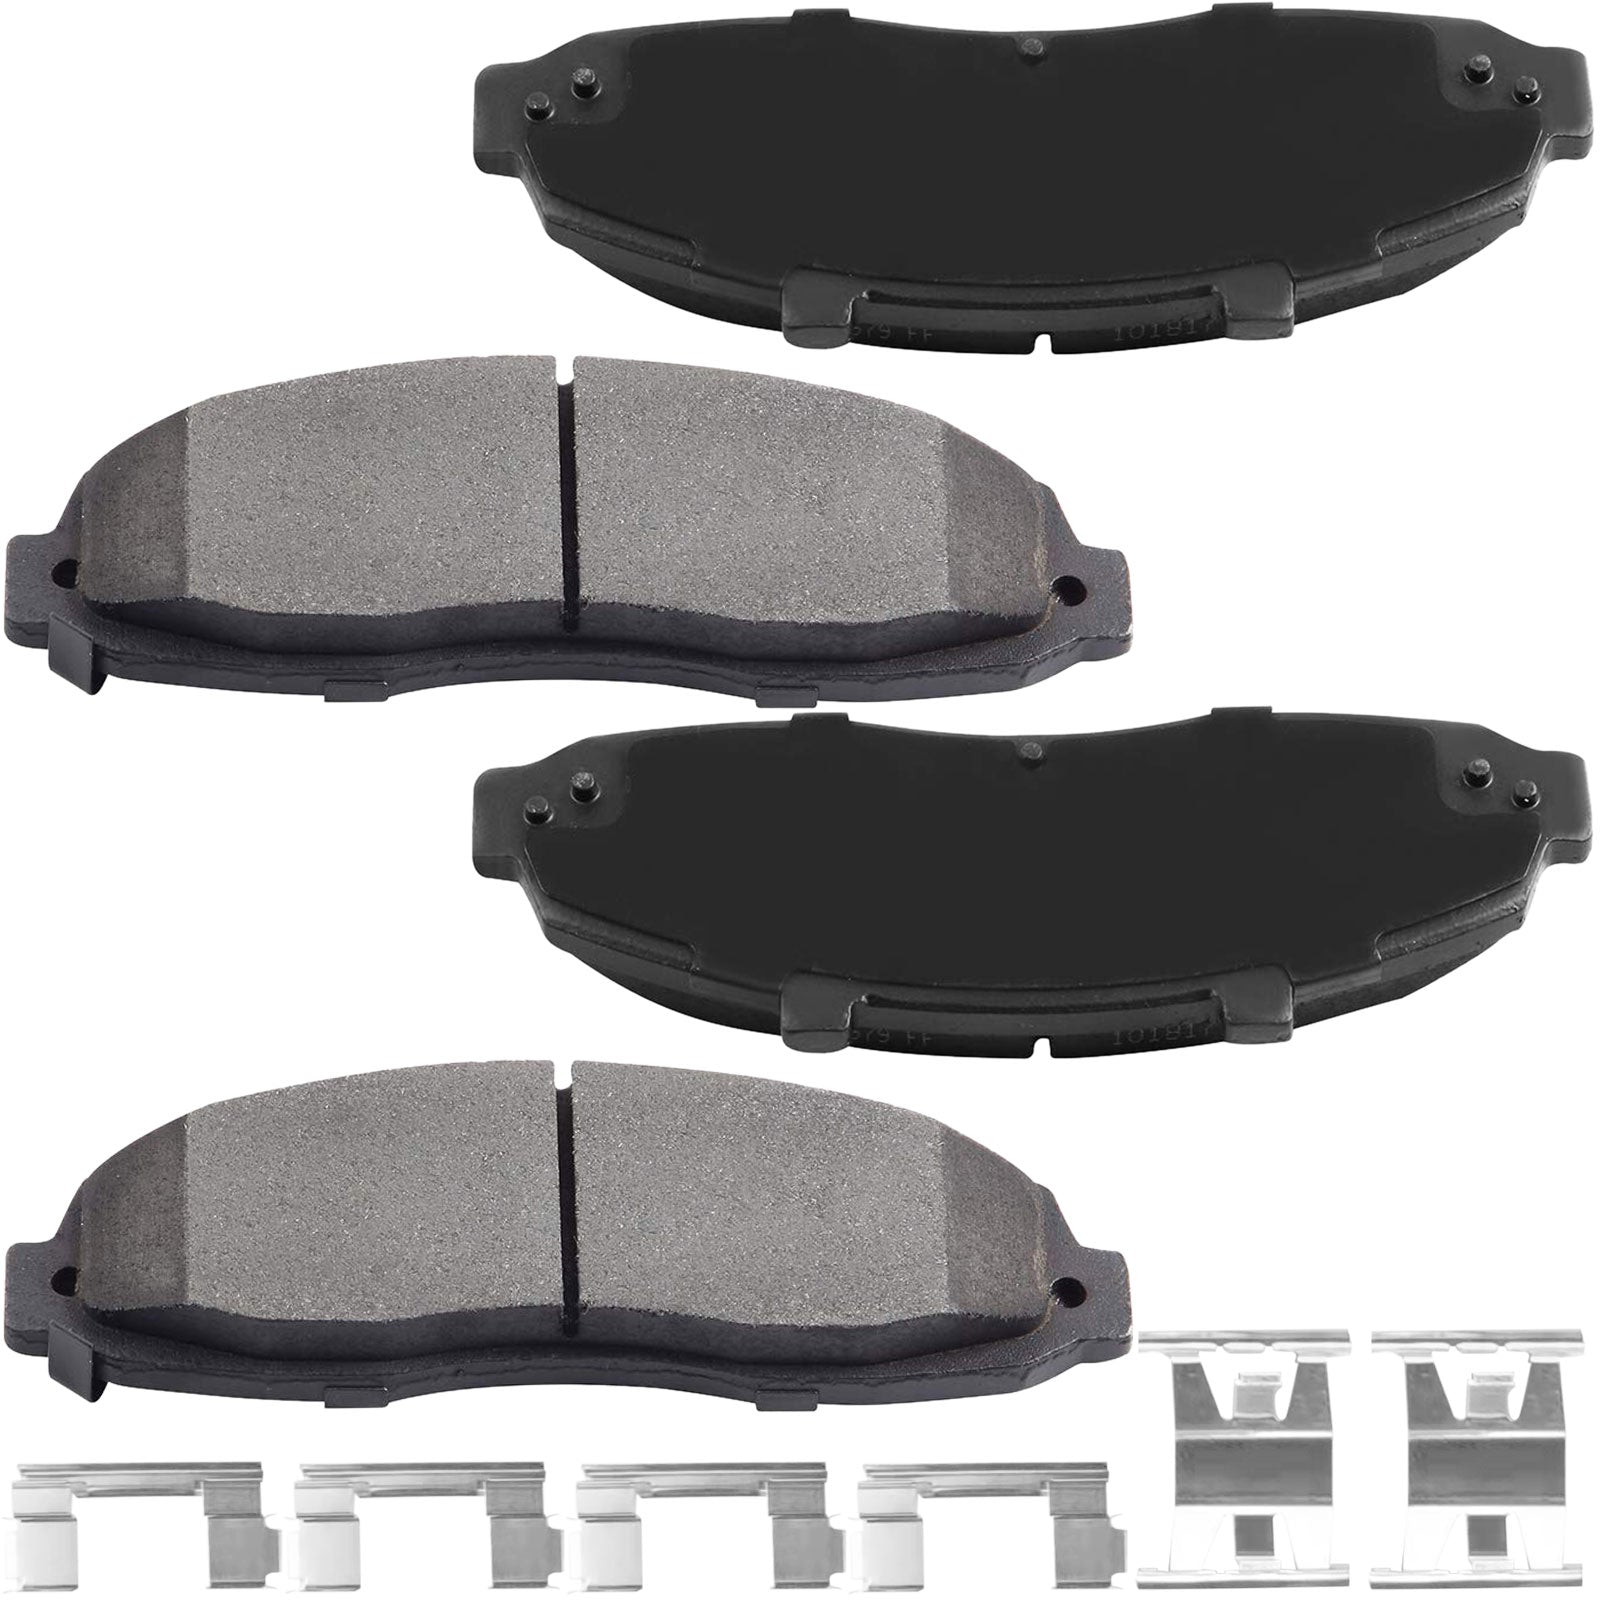 JADODE 4x Front Ceramic Brake Pads for 1997- 2000 2001 2002 2003 Ford F-150 w/Hardware